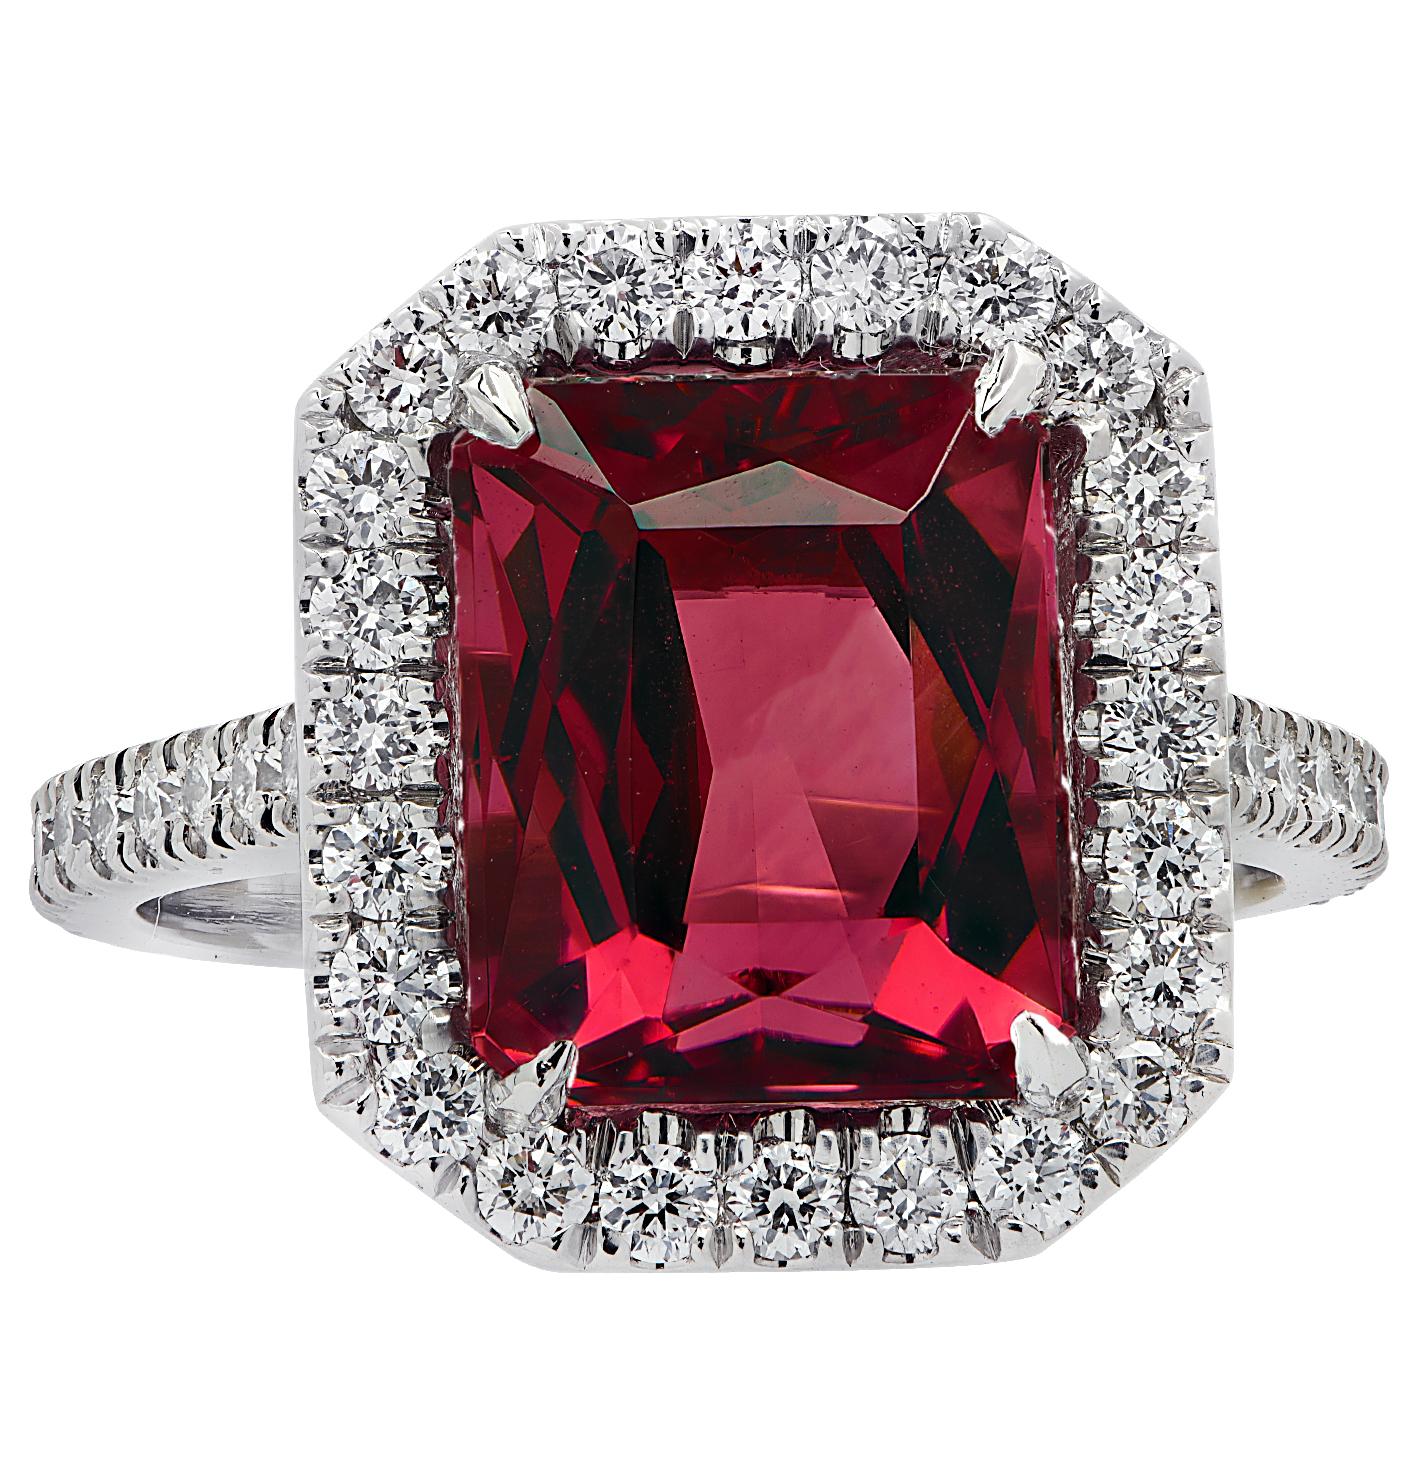 Sensational Vivid Diamonds halo engagement ring crafted in platinum showcasing an exquisite Radiant Cut Rubelite Tourmaline weighing 3.90 carats. The halo and band of this spectacular ring are adorned with 46 carefully selected and perfectly matched